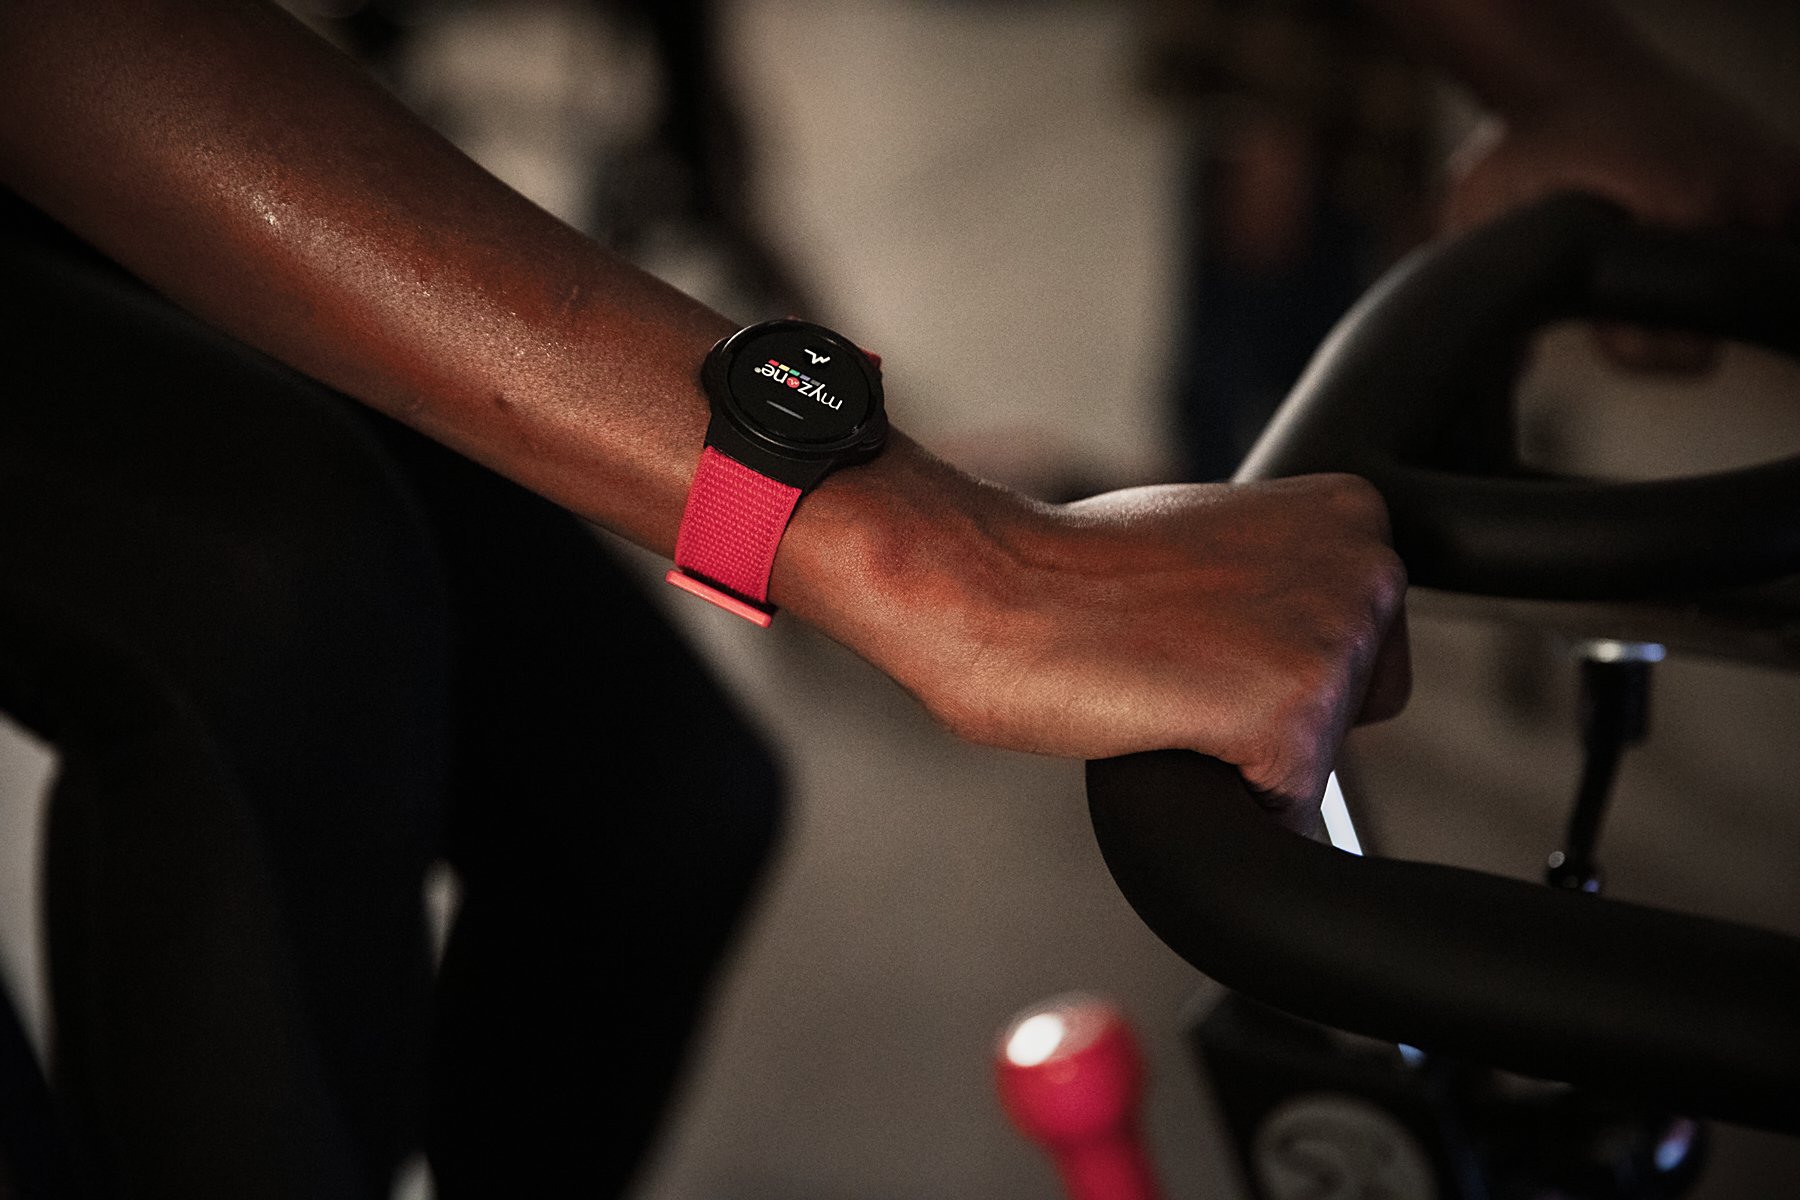 Arm wearing a Myzone heart rate monitor, holding on to an exercise bike